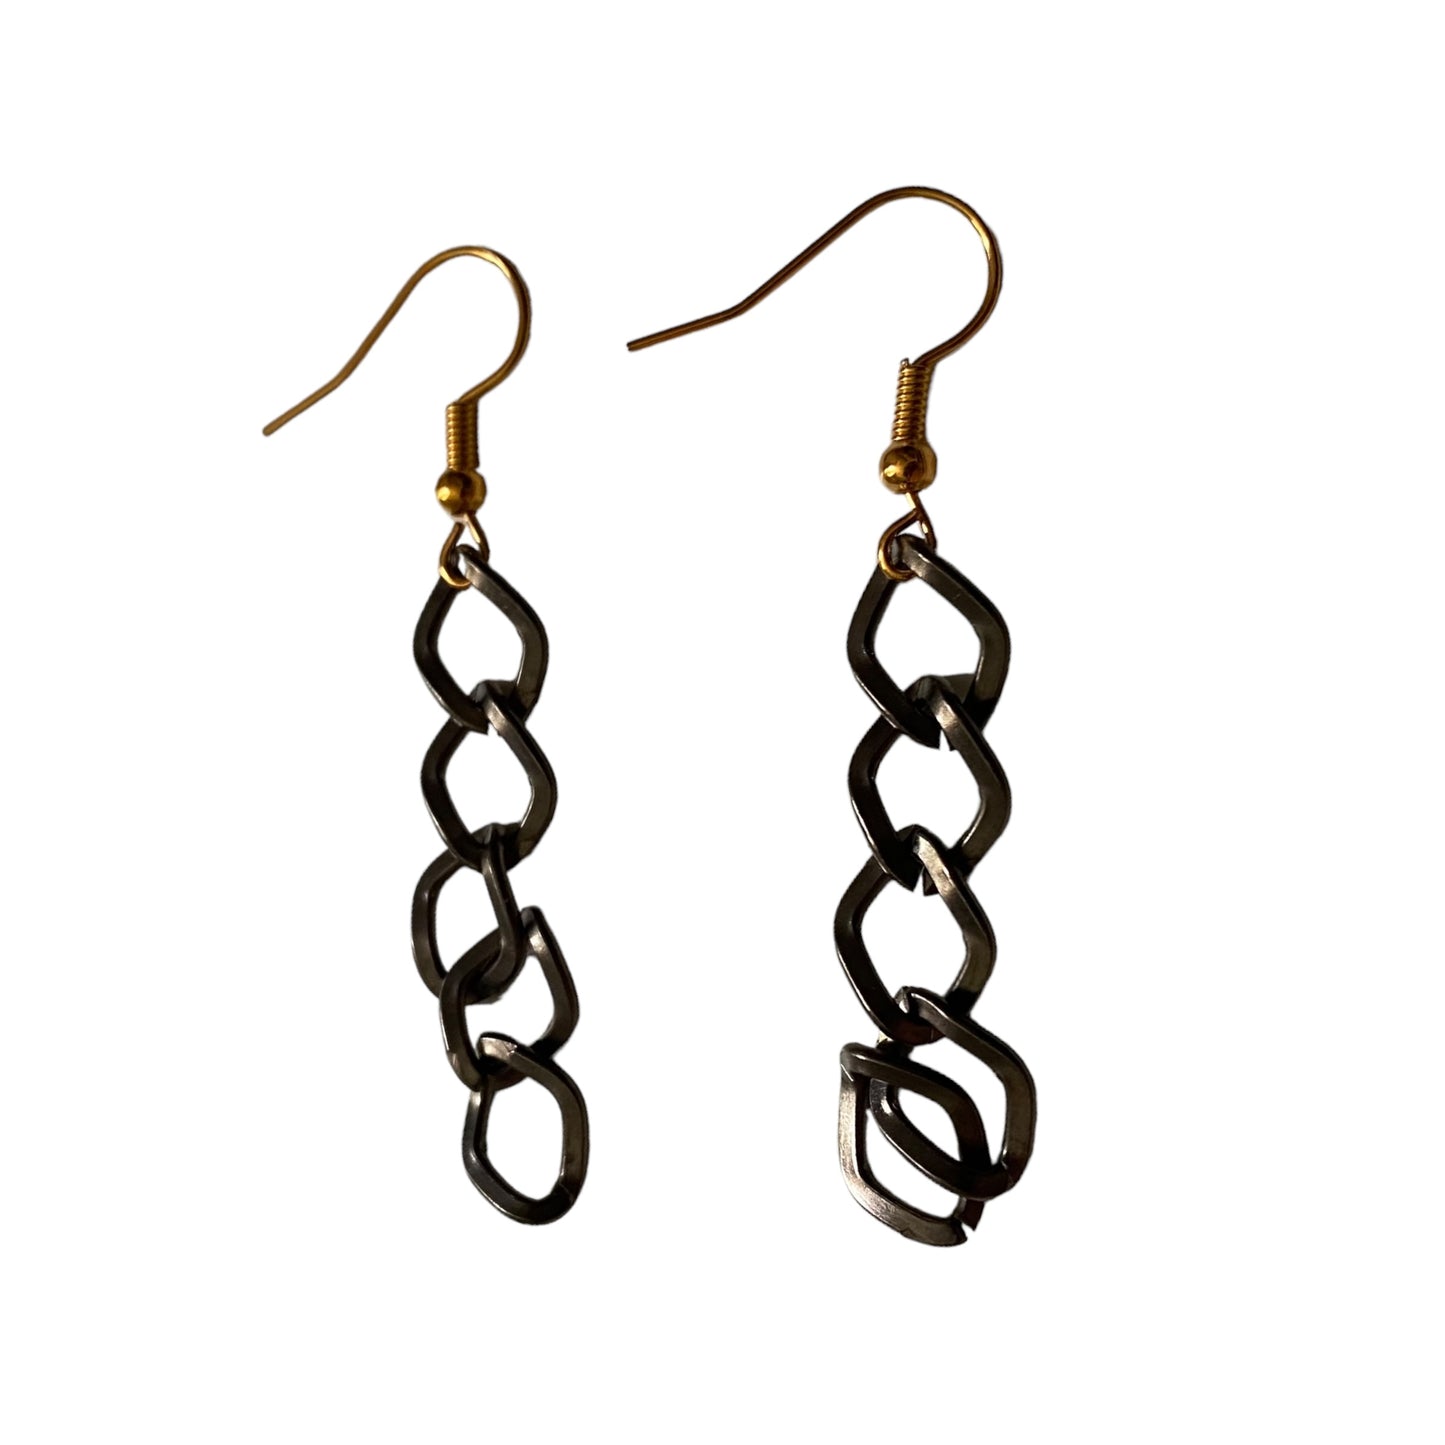 Vintage Earrings Chained Streetstyle Punk